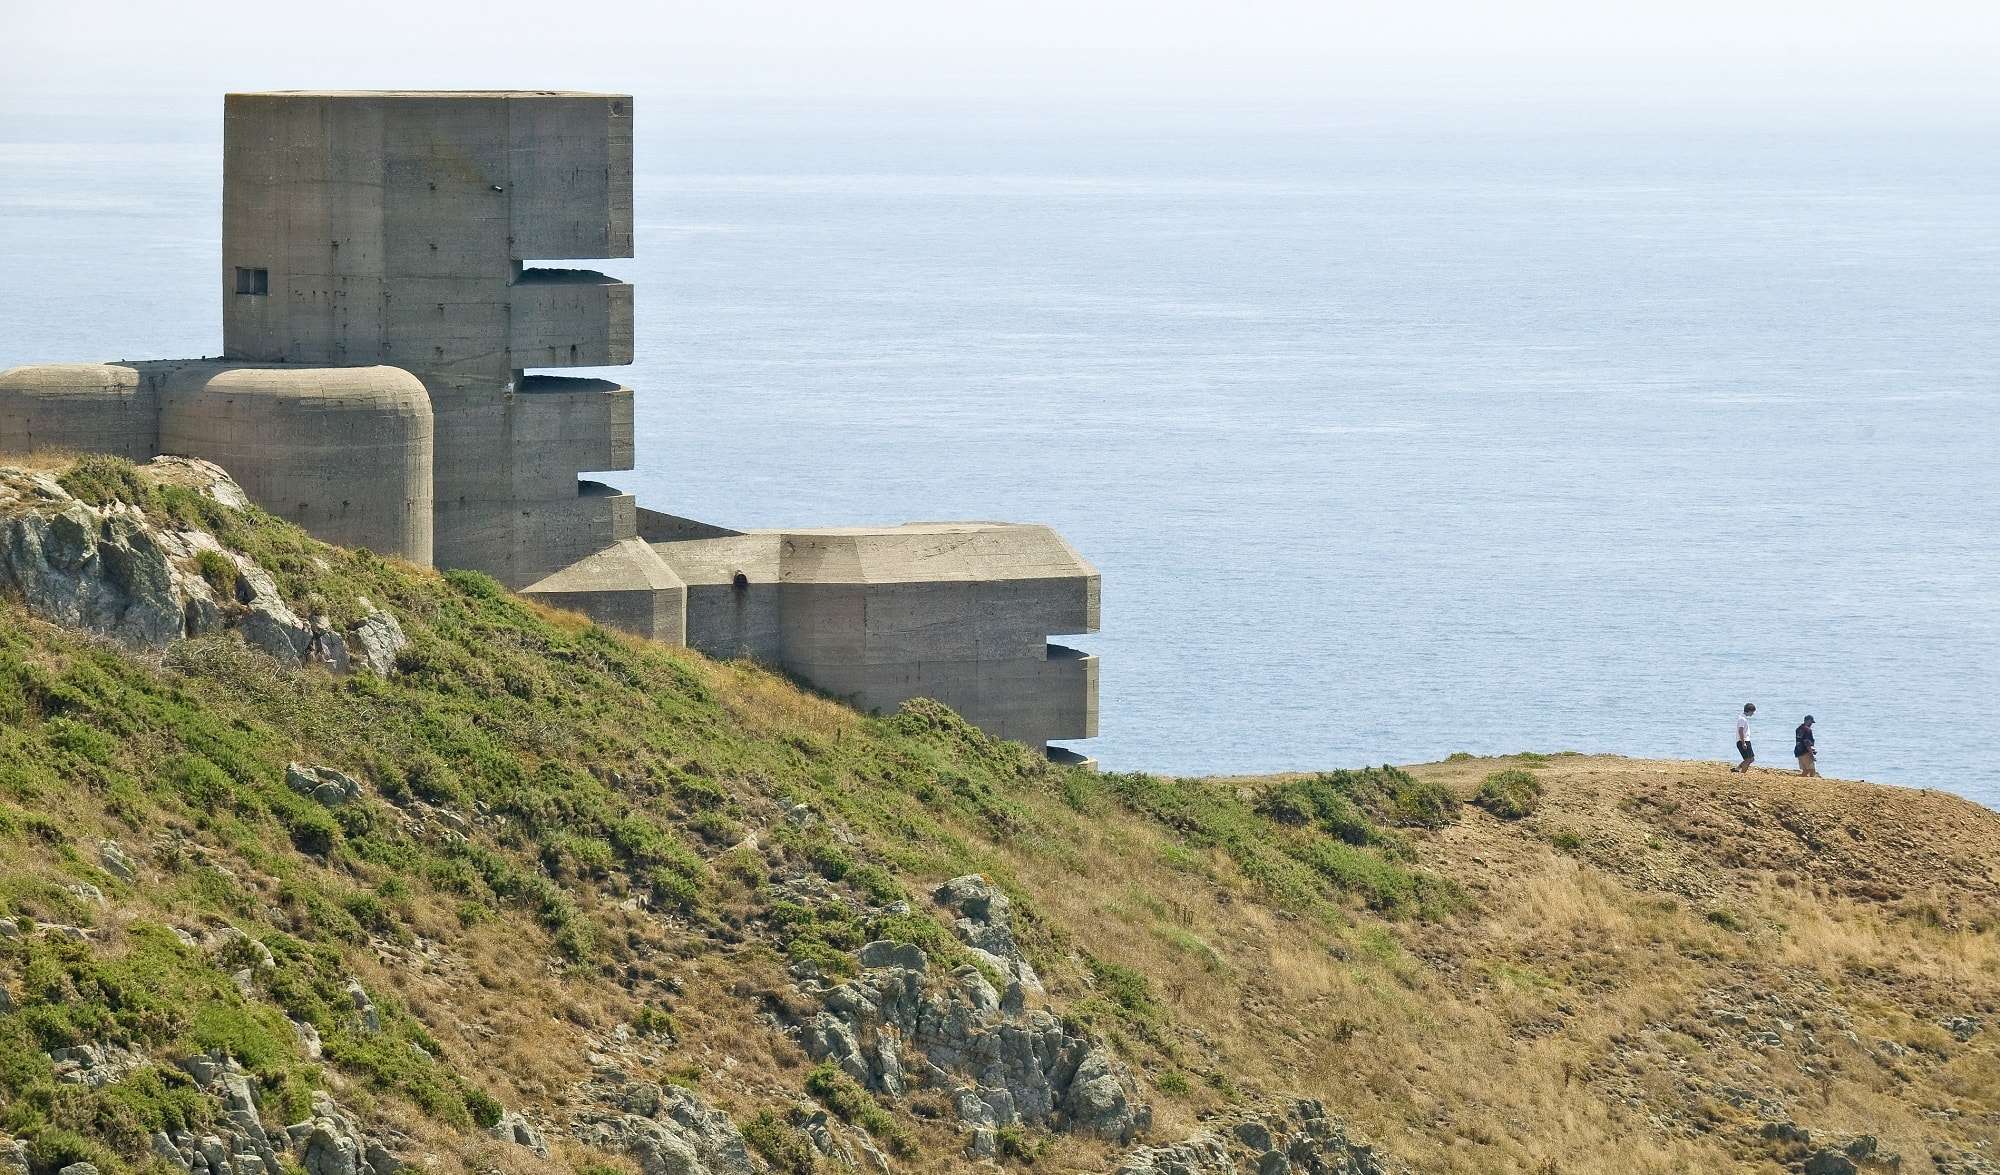 Image of The German Range Finding and Observation Tower, Guernsey, England